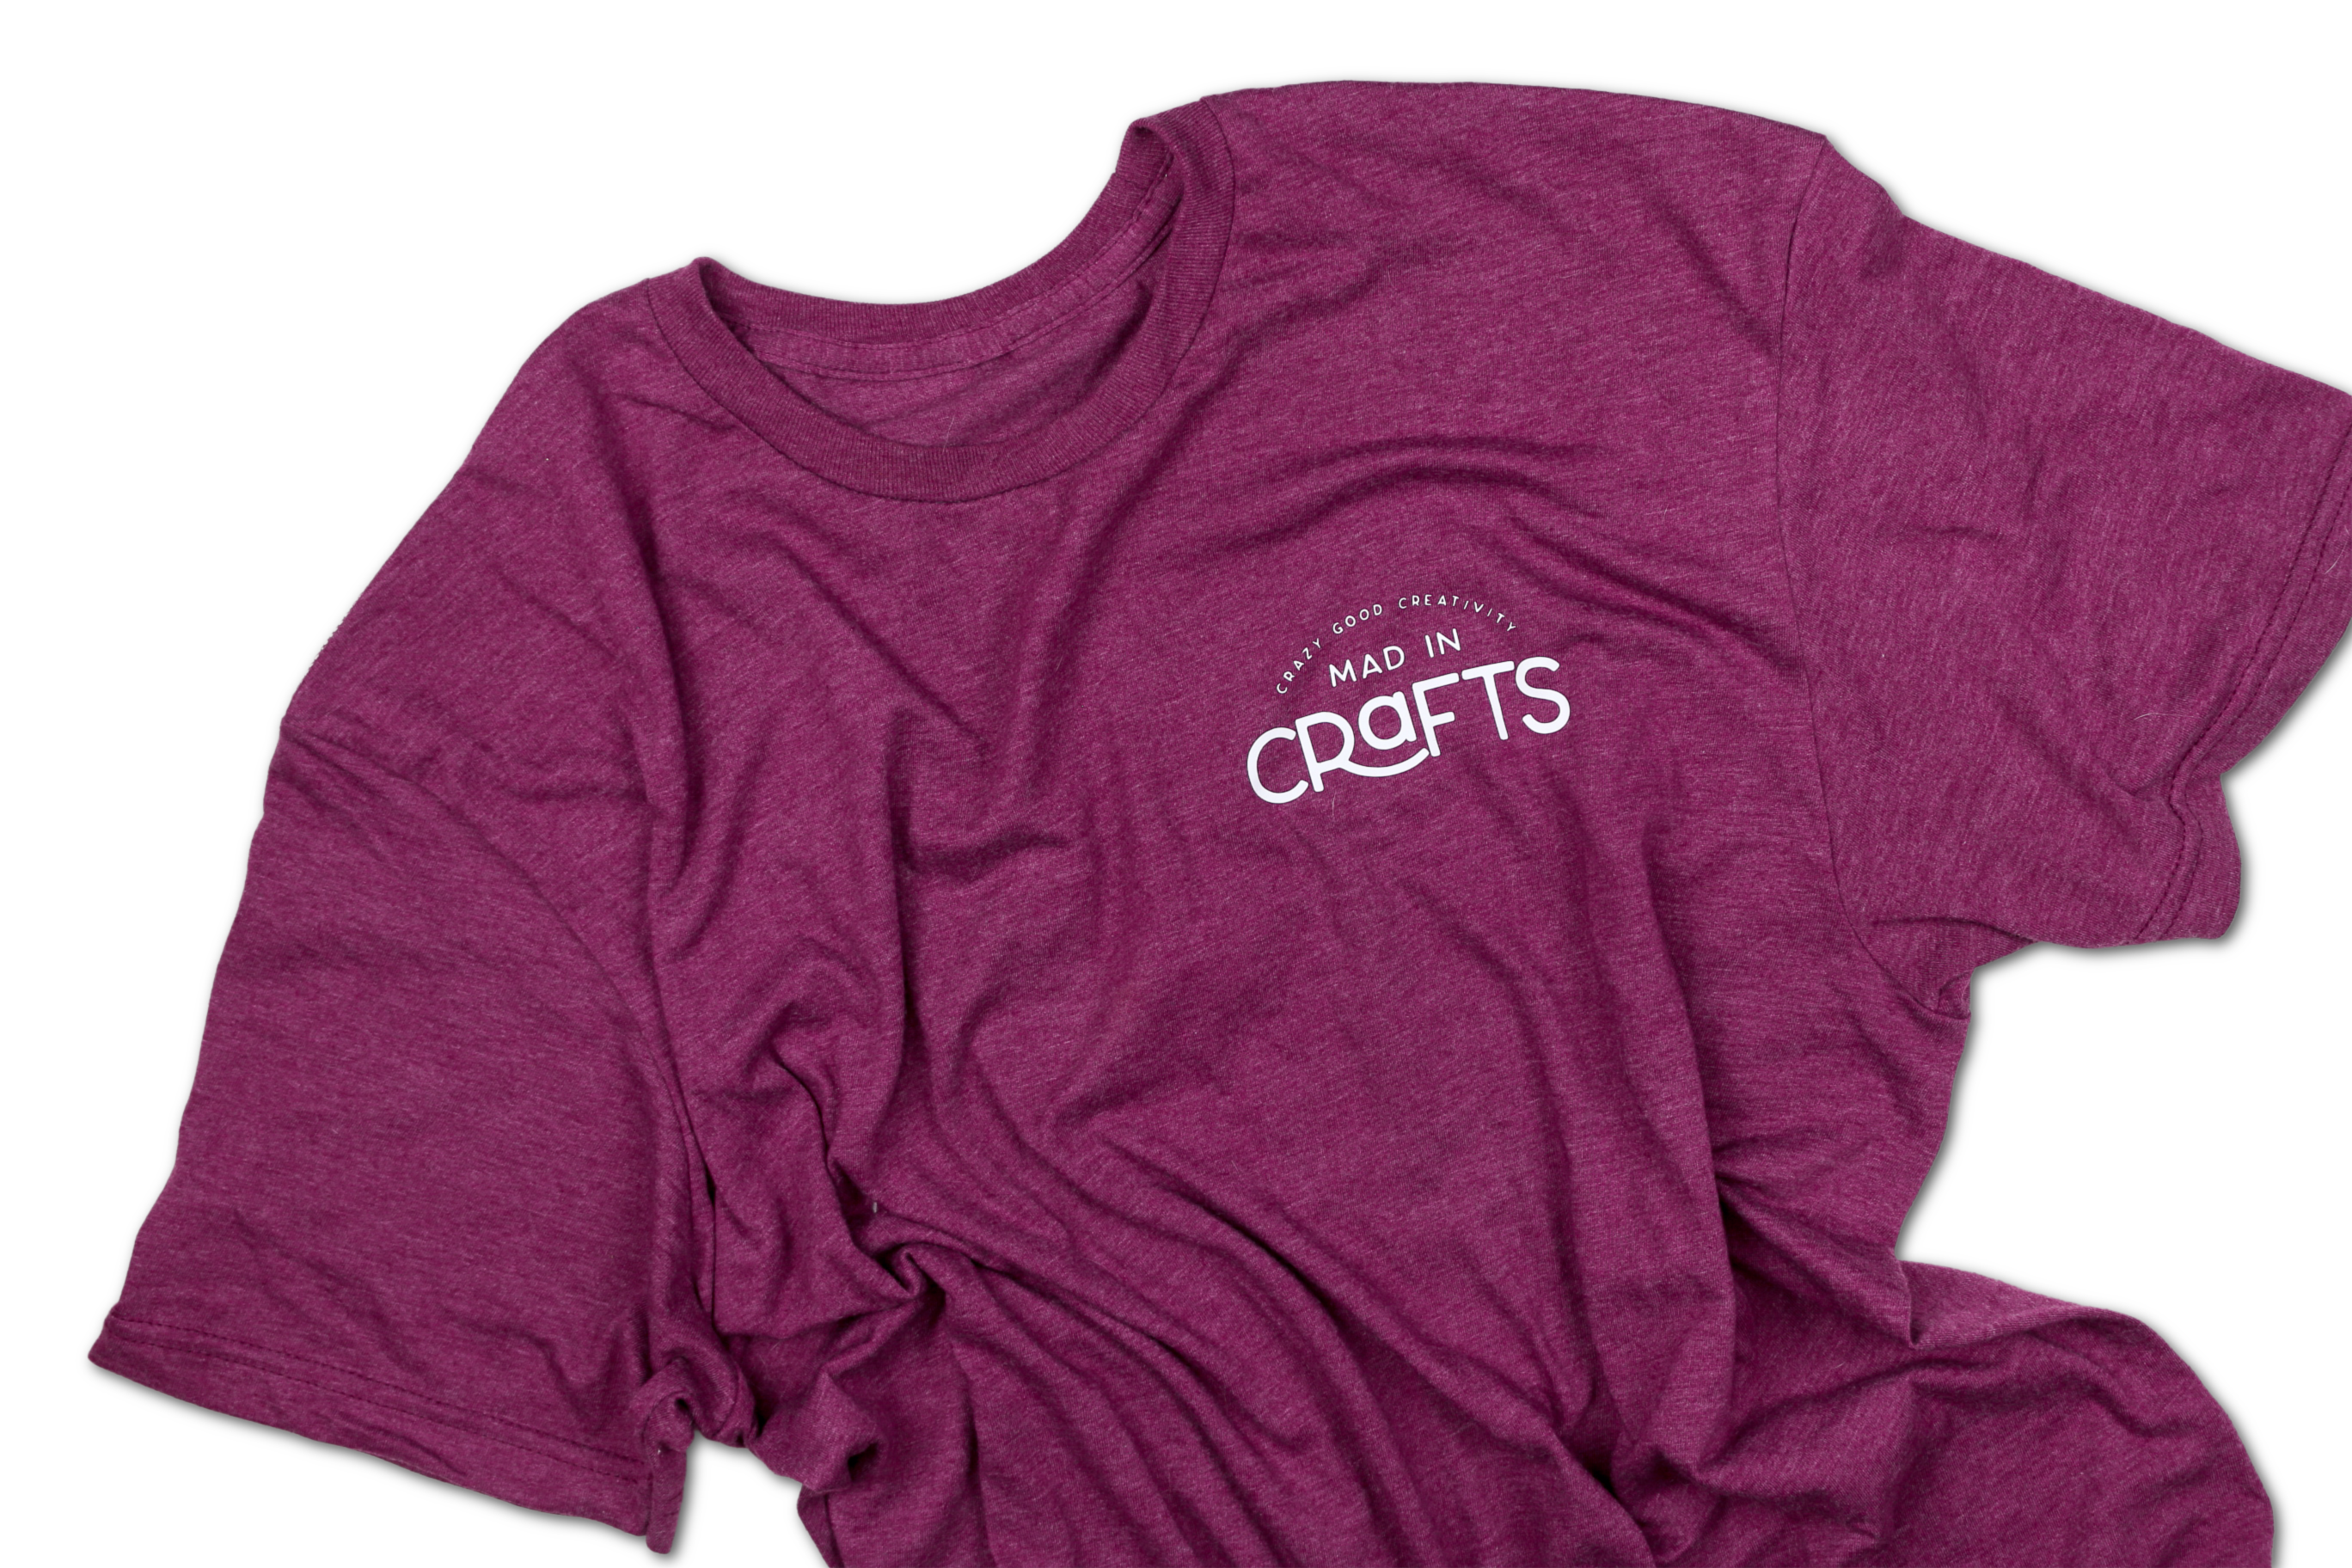 berry colored shirt with Mad in Crafts logo in vinyl